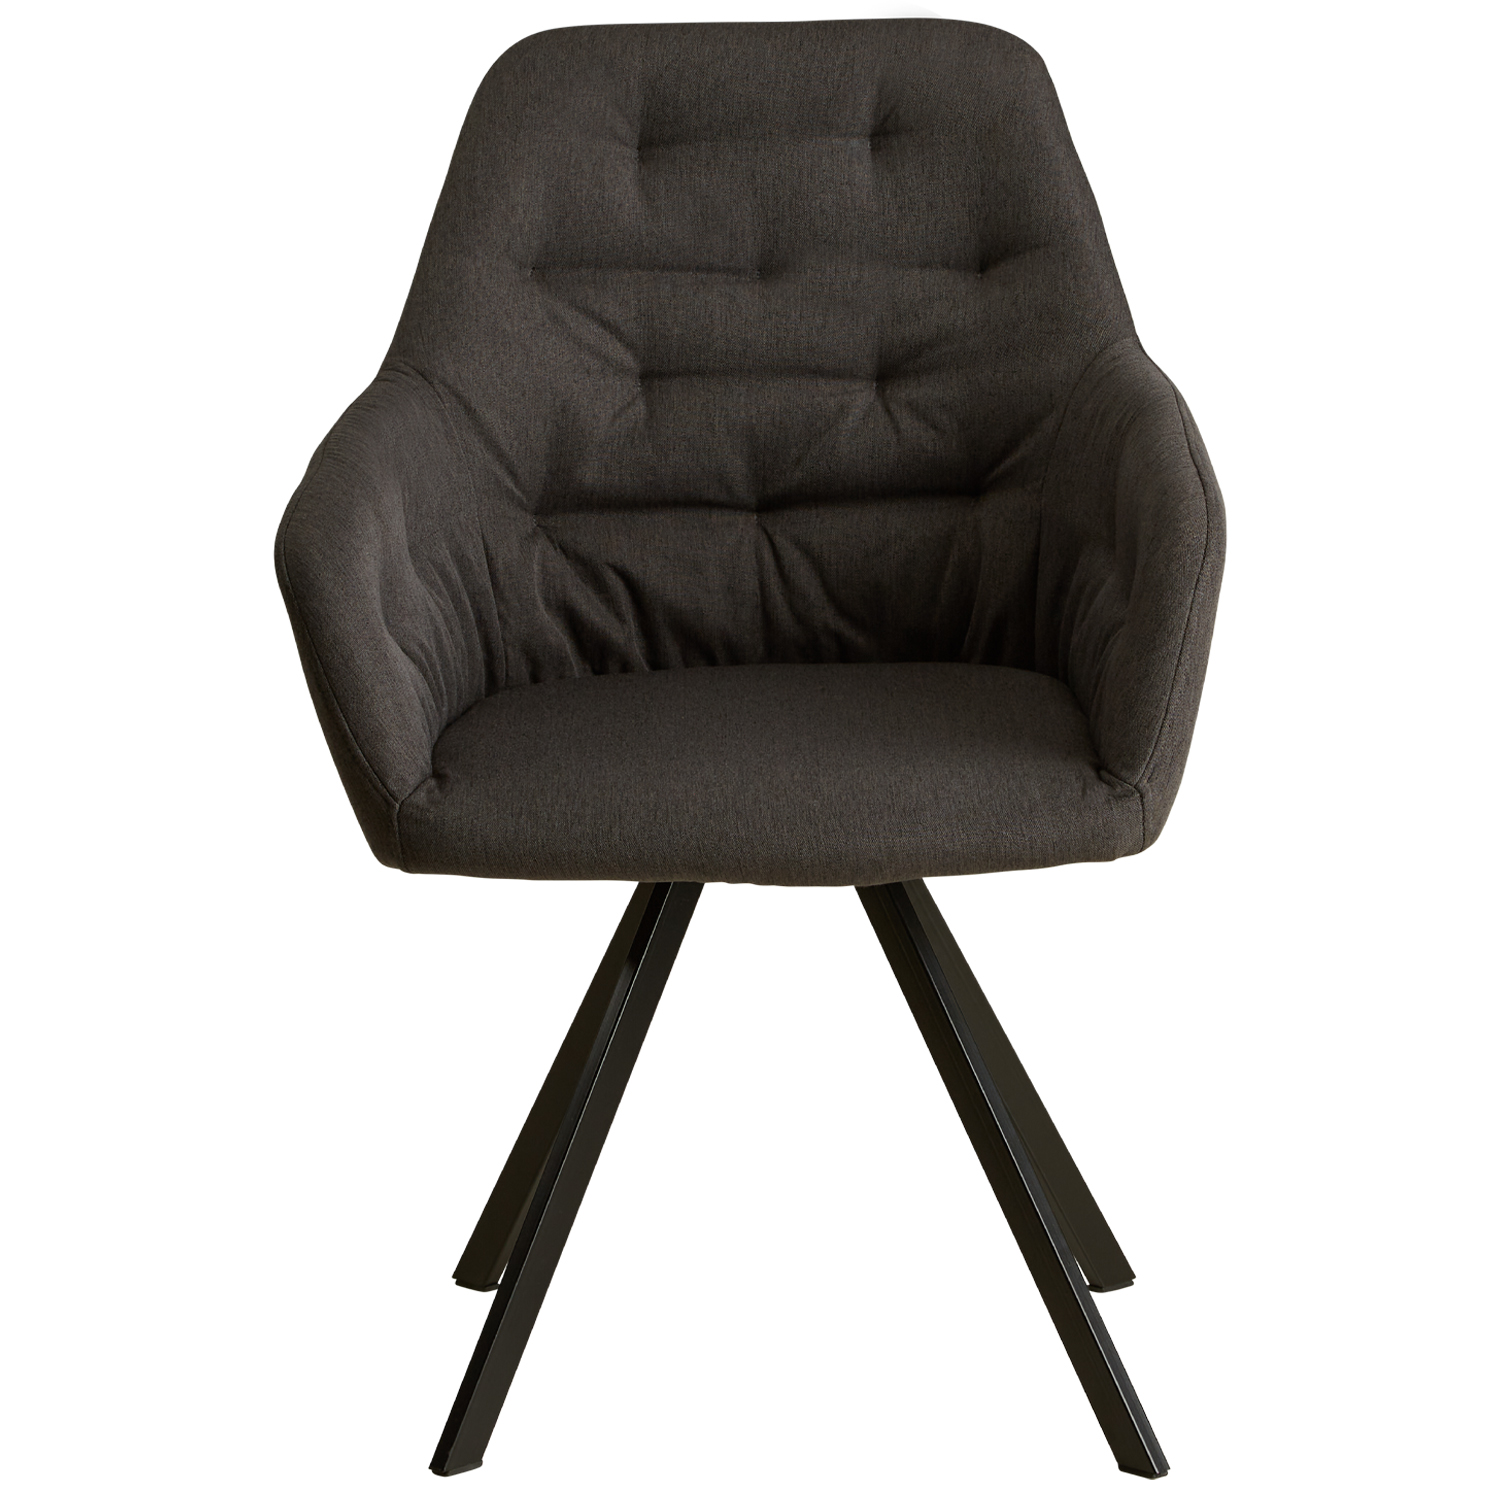 Dining Chair Egg Chair Anthracite Armchair Dining Room Chair Upholstered Chair Eames Chair